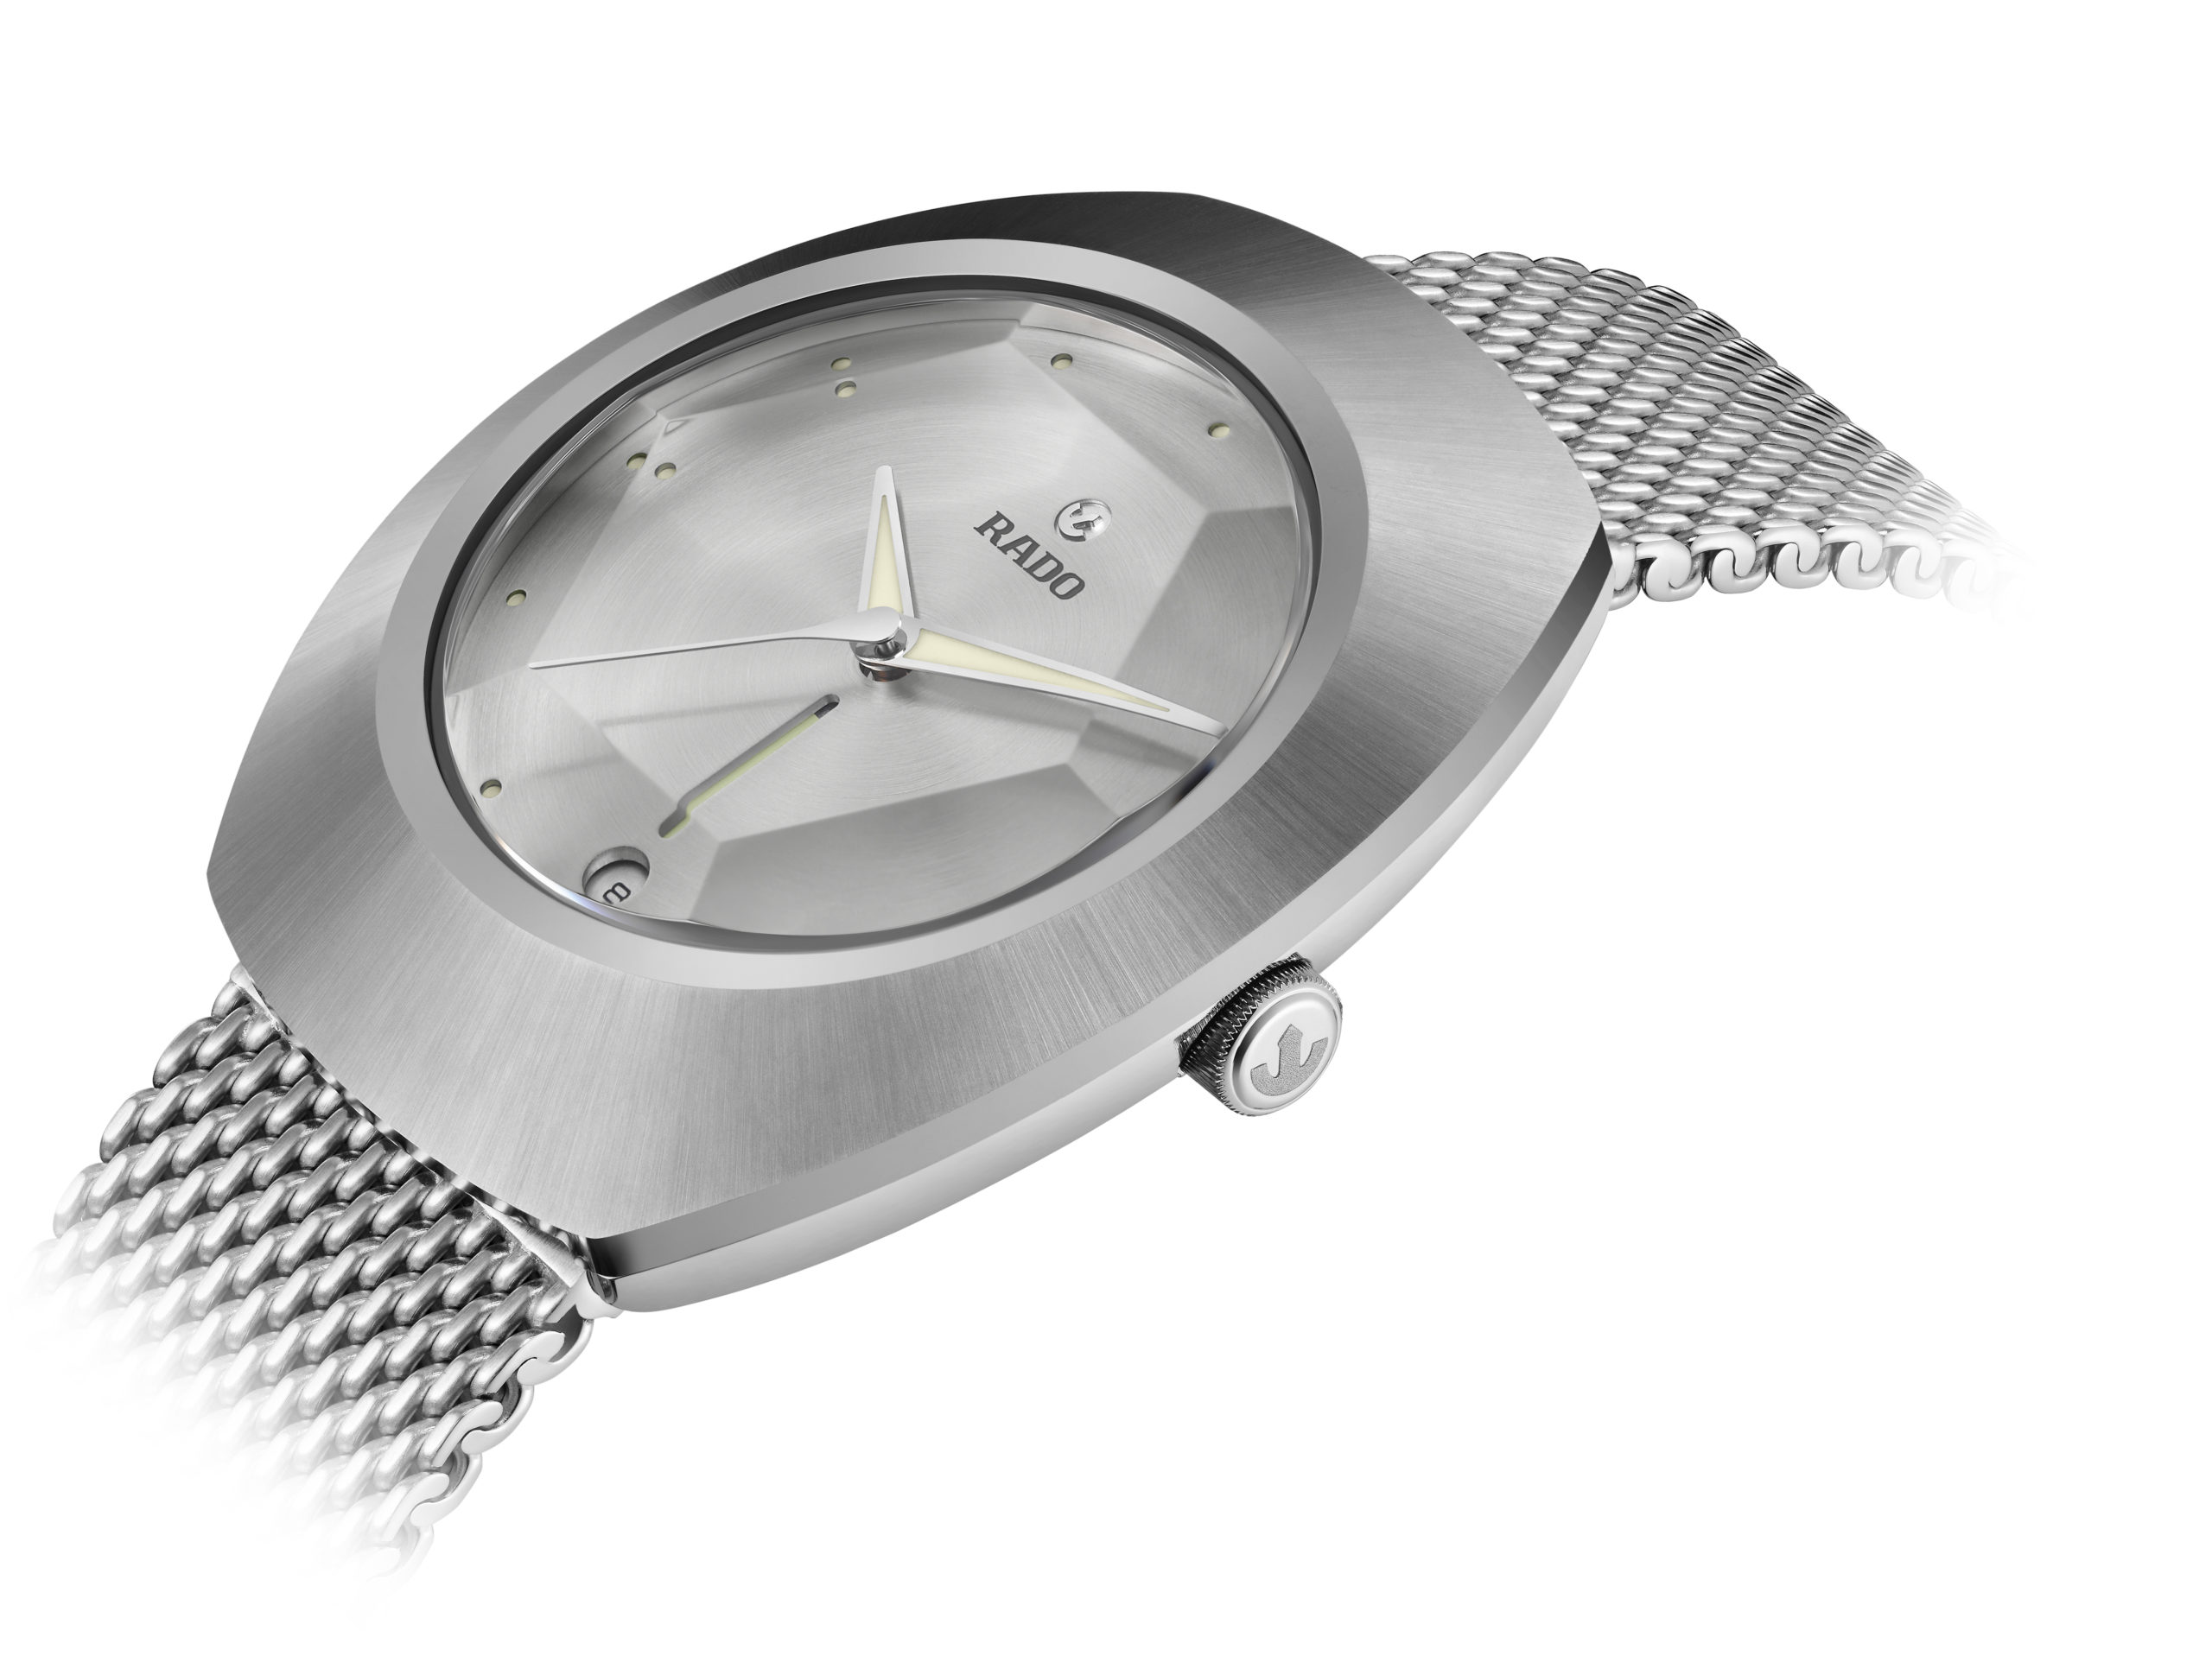 Rado Reimagines Its DiaStar with Two Stunning Editions | WatchTime